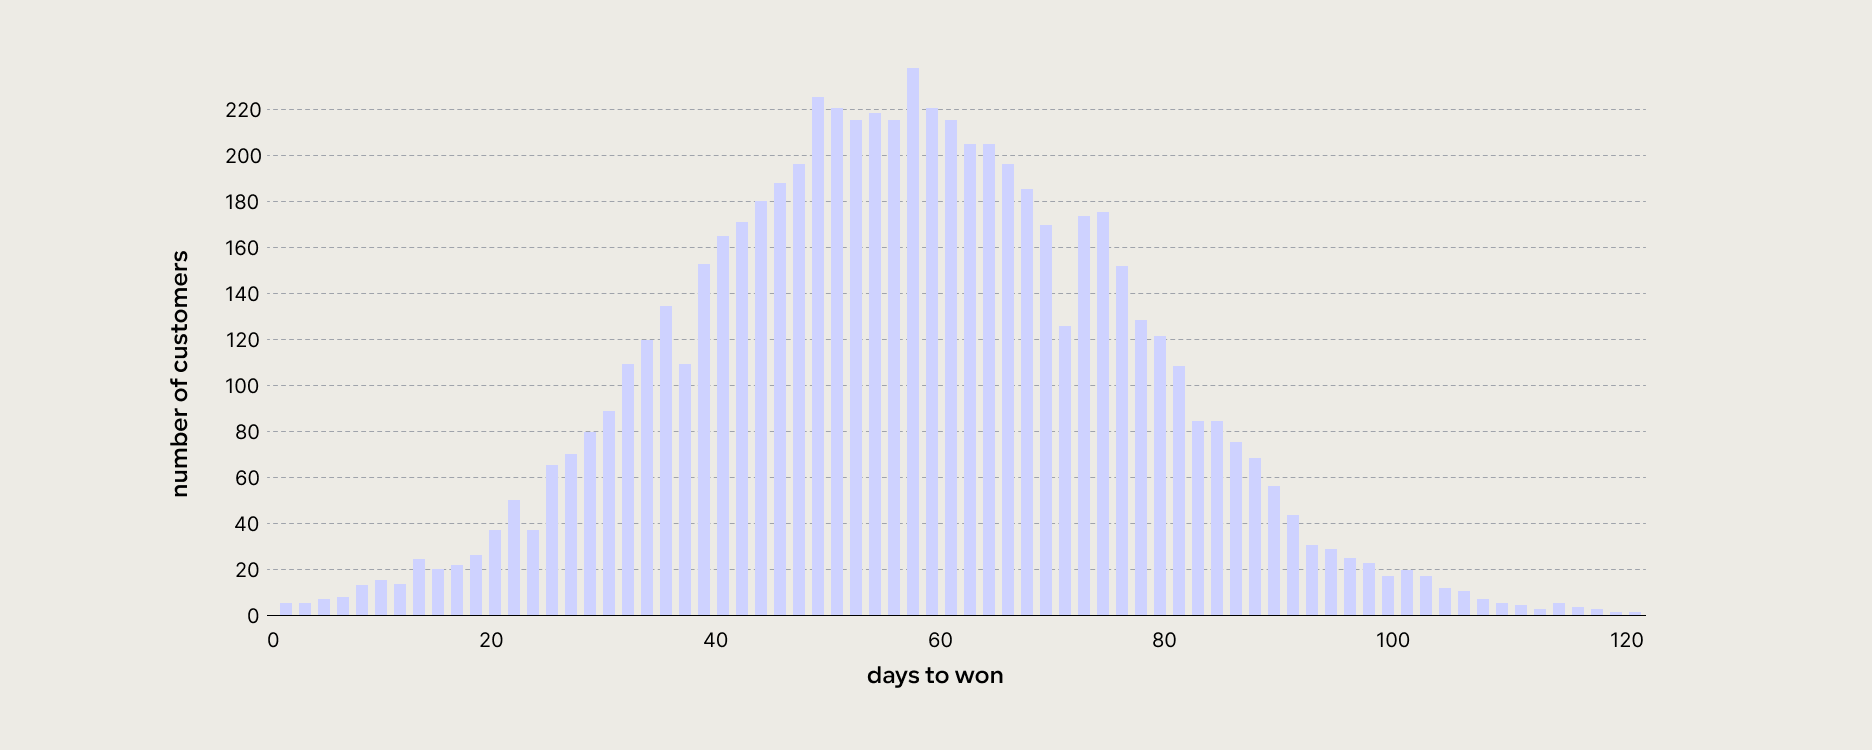 A graph of a sales funnel length in days, with ‘days to won’ on the x axis and ‘number of customers’ on the y axis